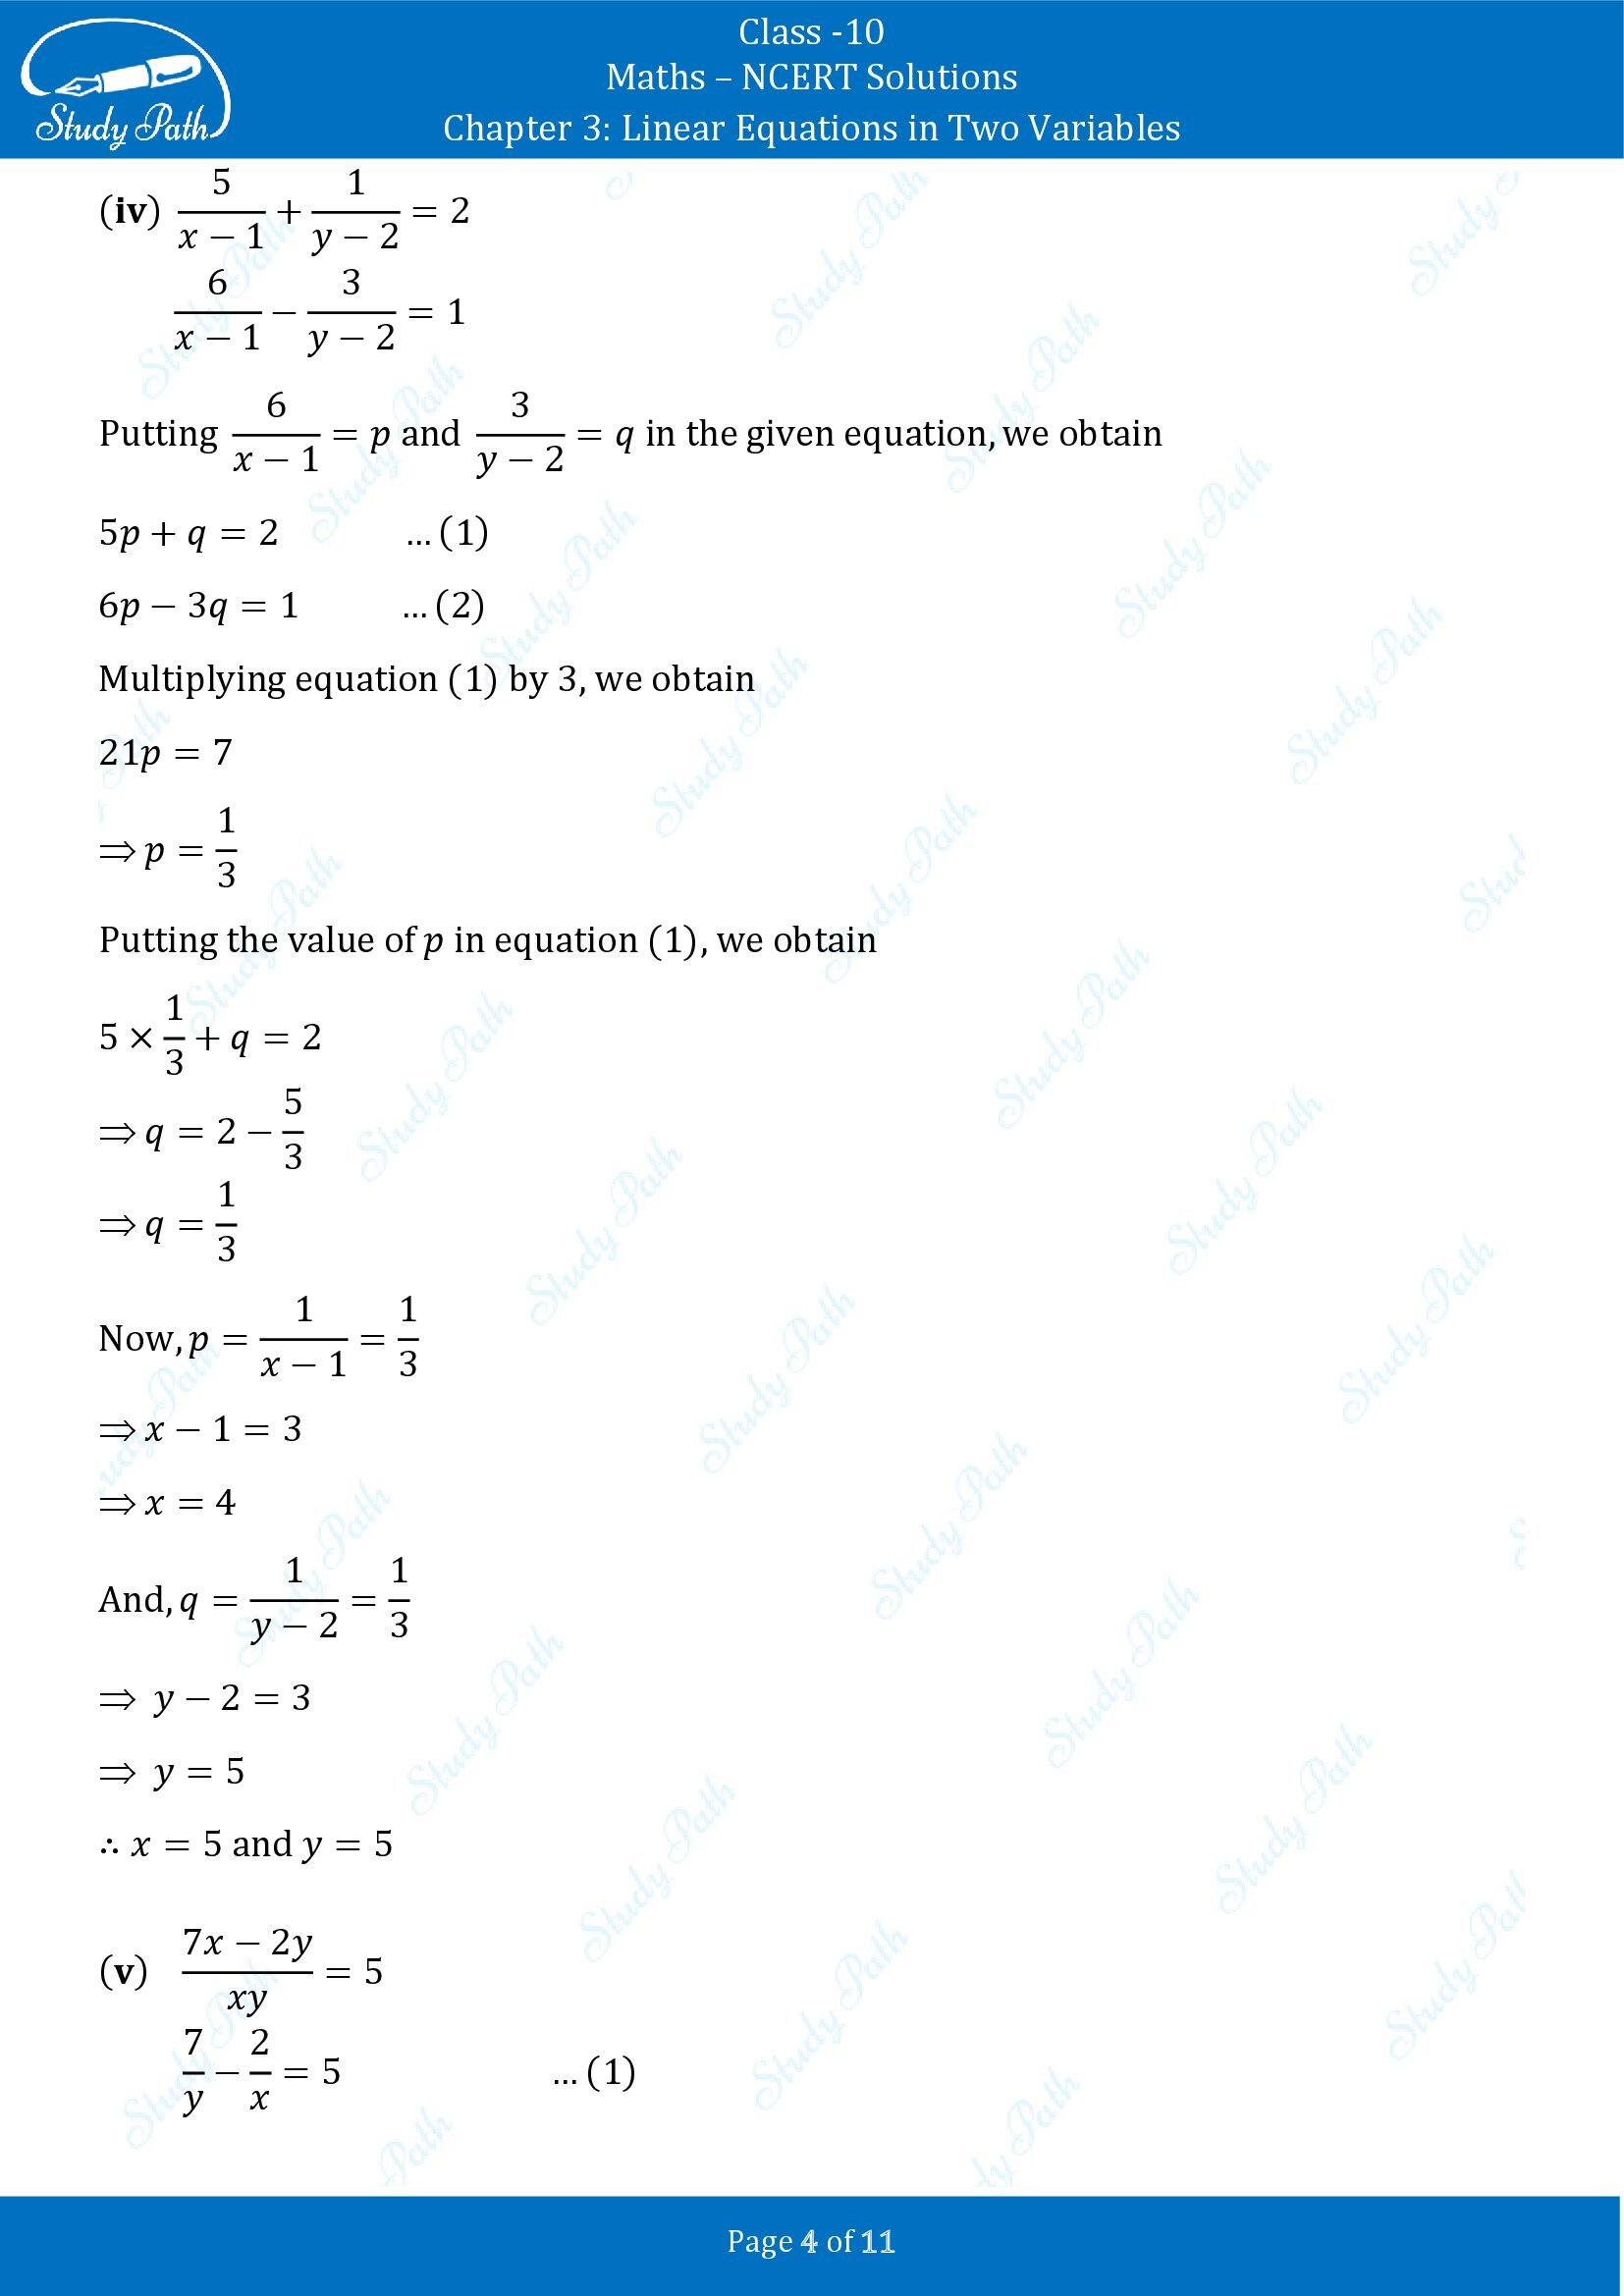 NCERT Solutions for Class 10 Maths Chapter 3 Linear Equations in Two Variables Exercise 3.6 00004